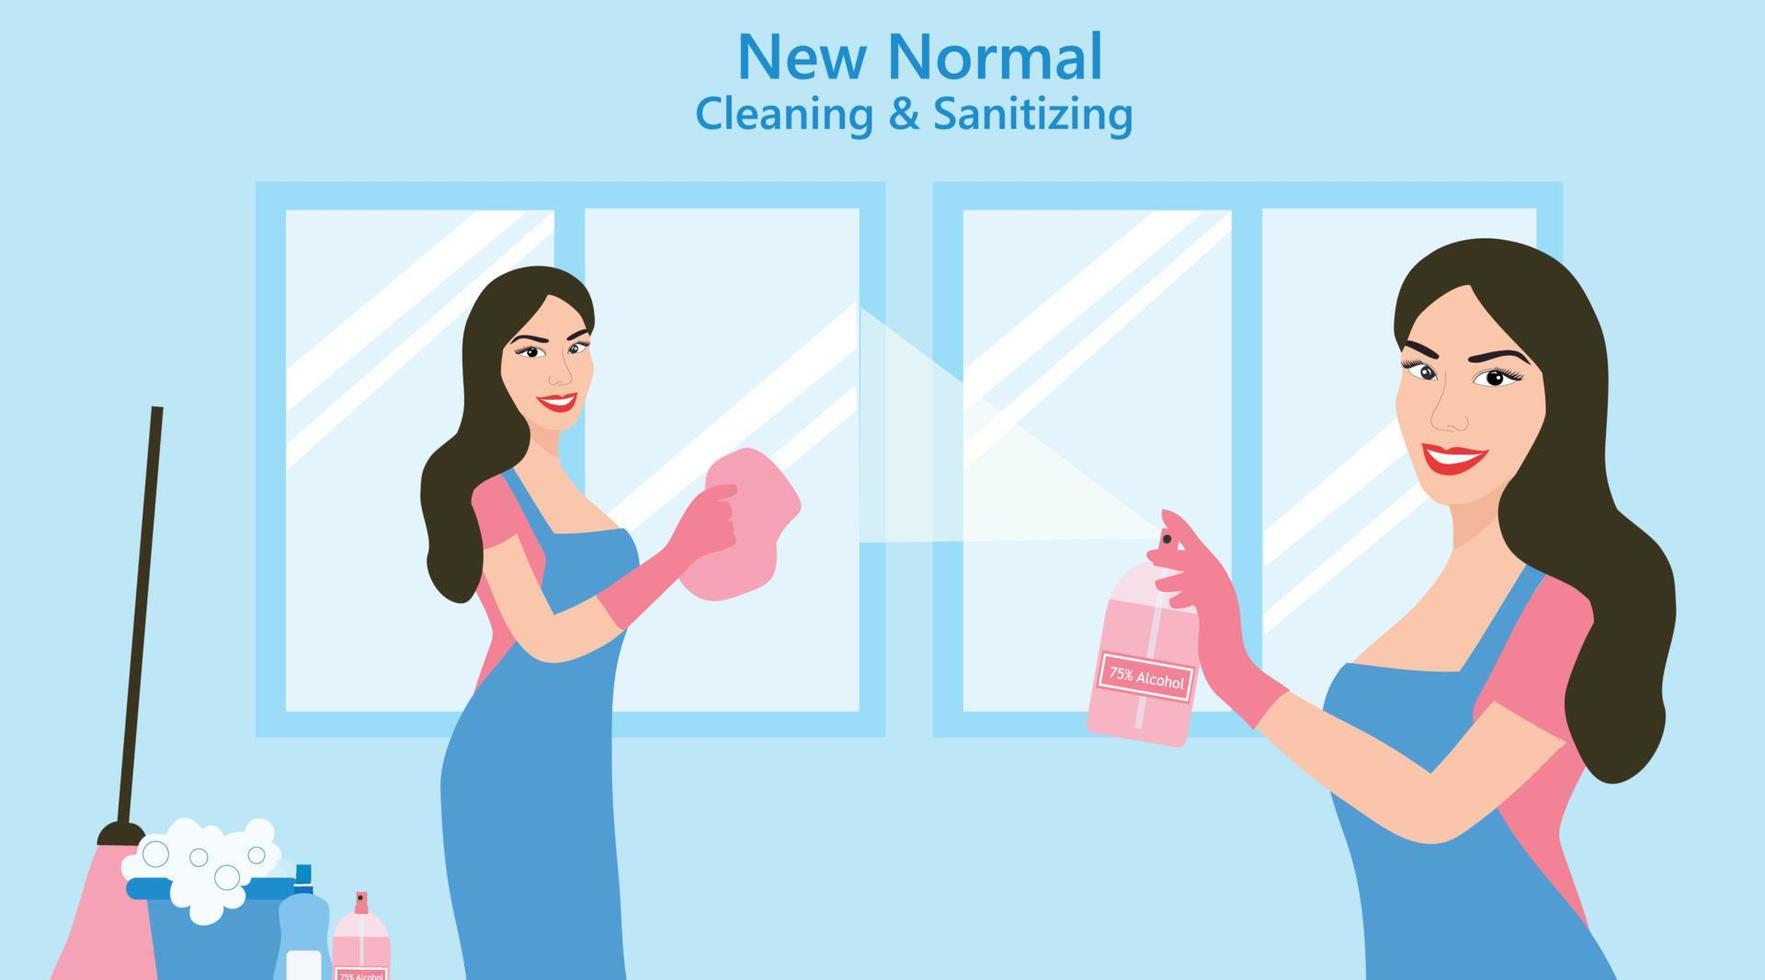 New normal cleaning and sanitizing concept, woman cleaning house and using  alcohol spray to protect covid-19 coronavirus vector illustration. COVID-19 coronavirus prevention concept